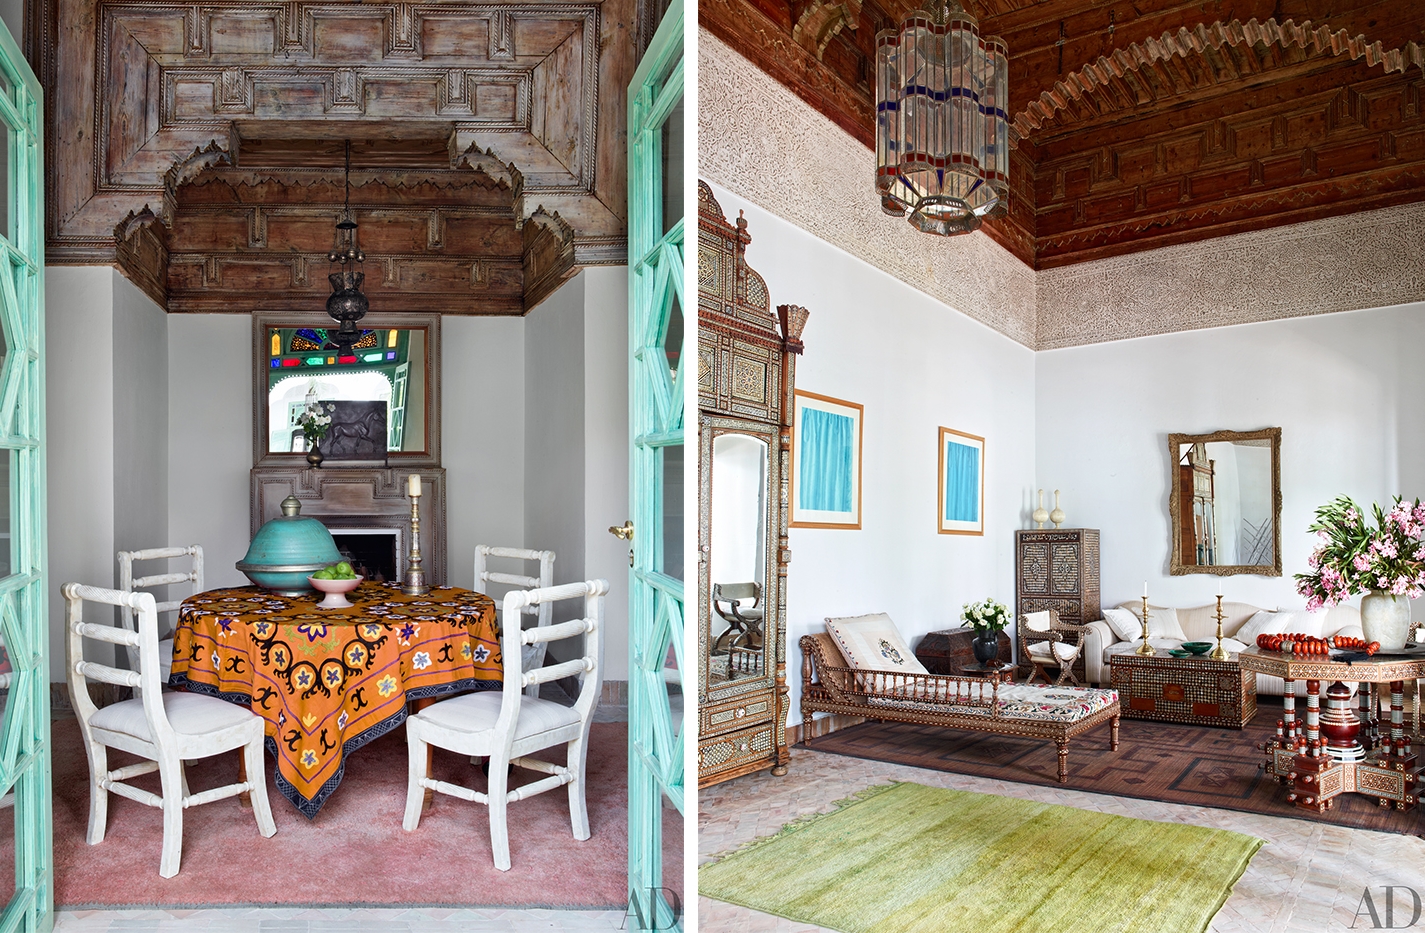  Images courtesy of  Architectural Digest  